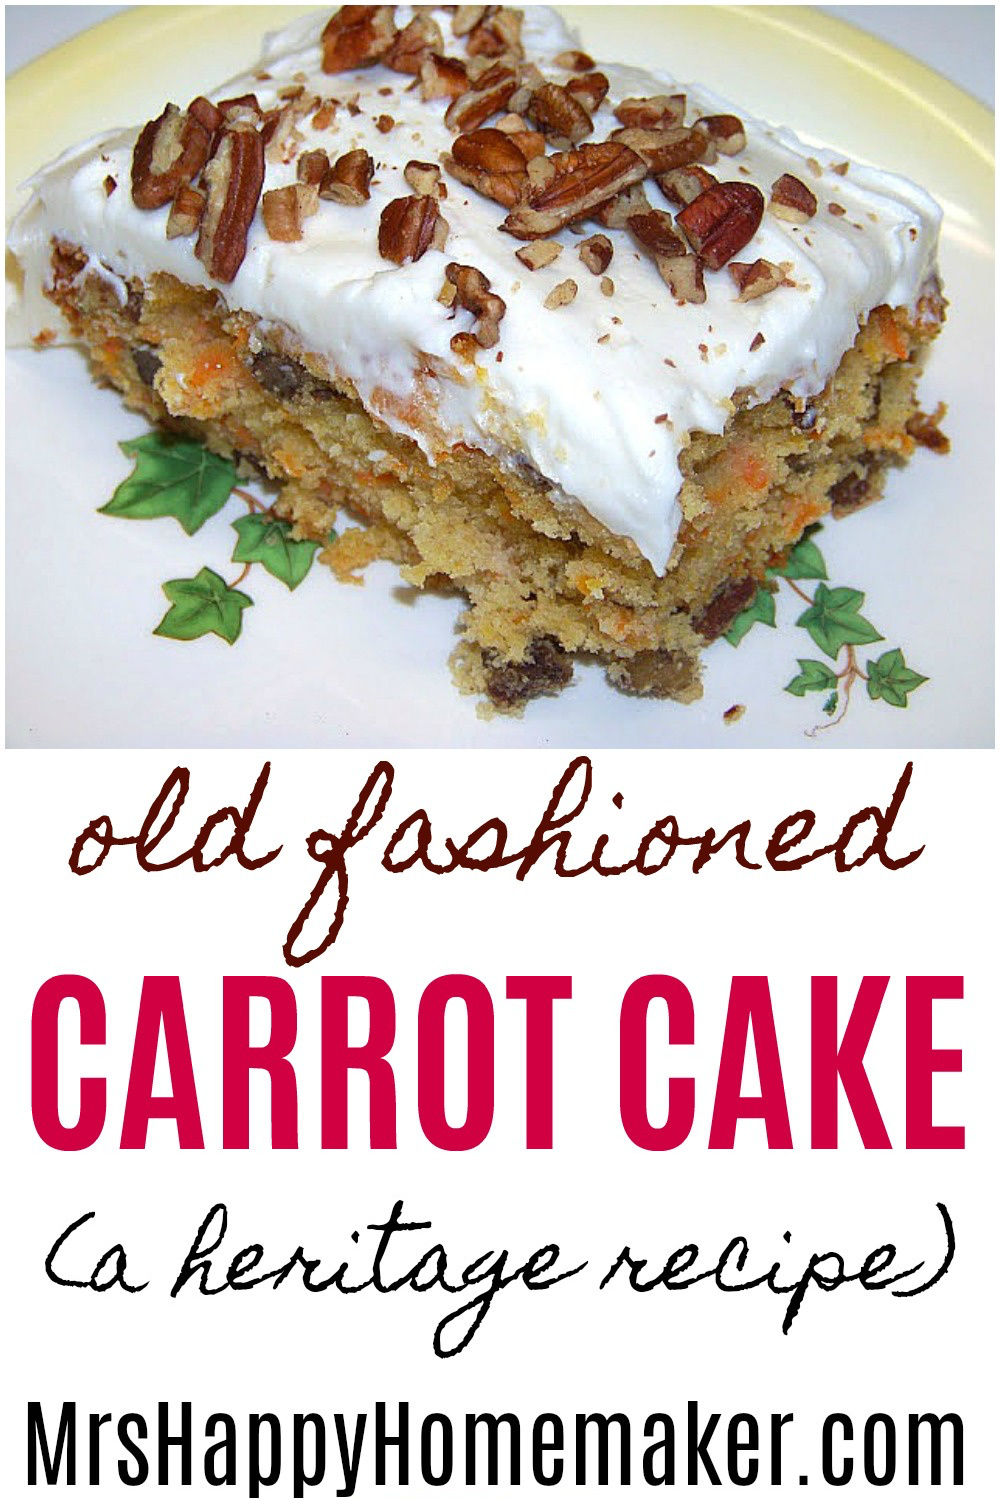 Carrot cake topped with pecans on a white plate with green leaves